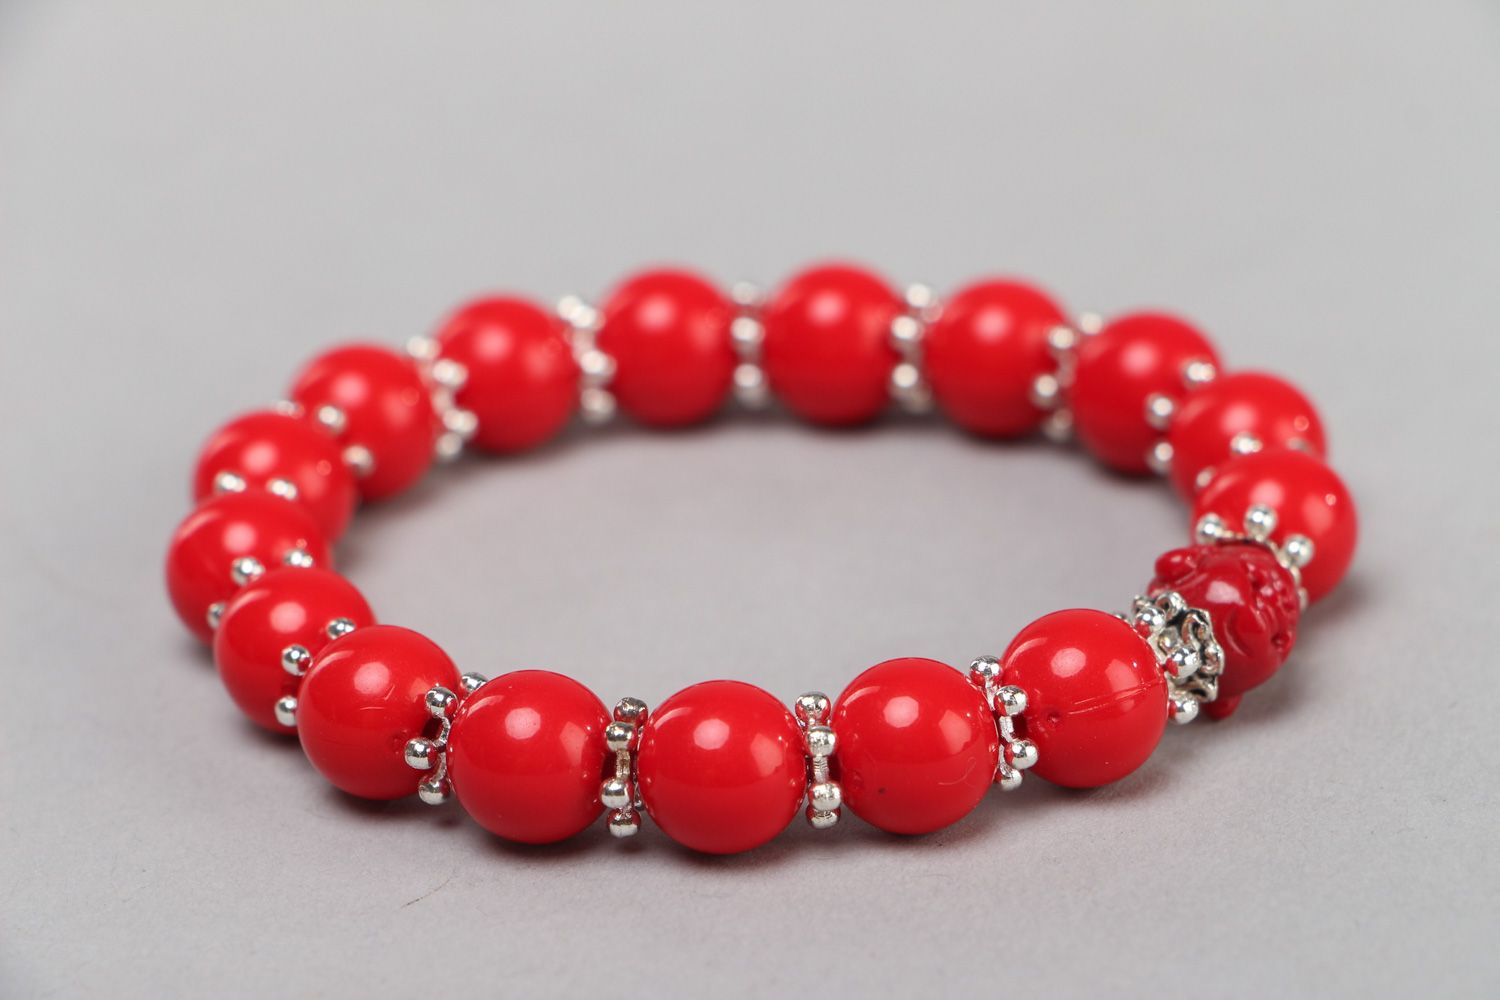 Handmade laconic stretch wrist bracelet with plastic beads of red color for women photo 1